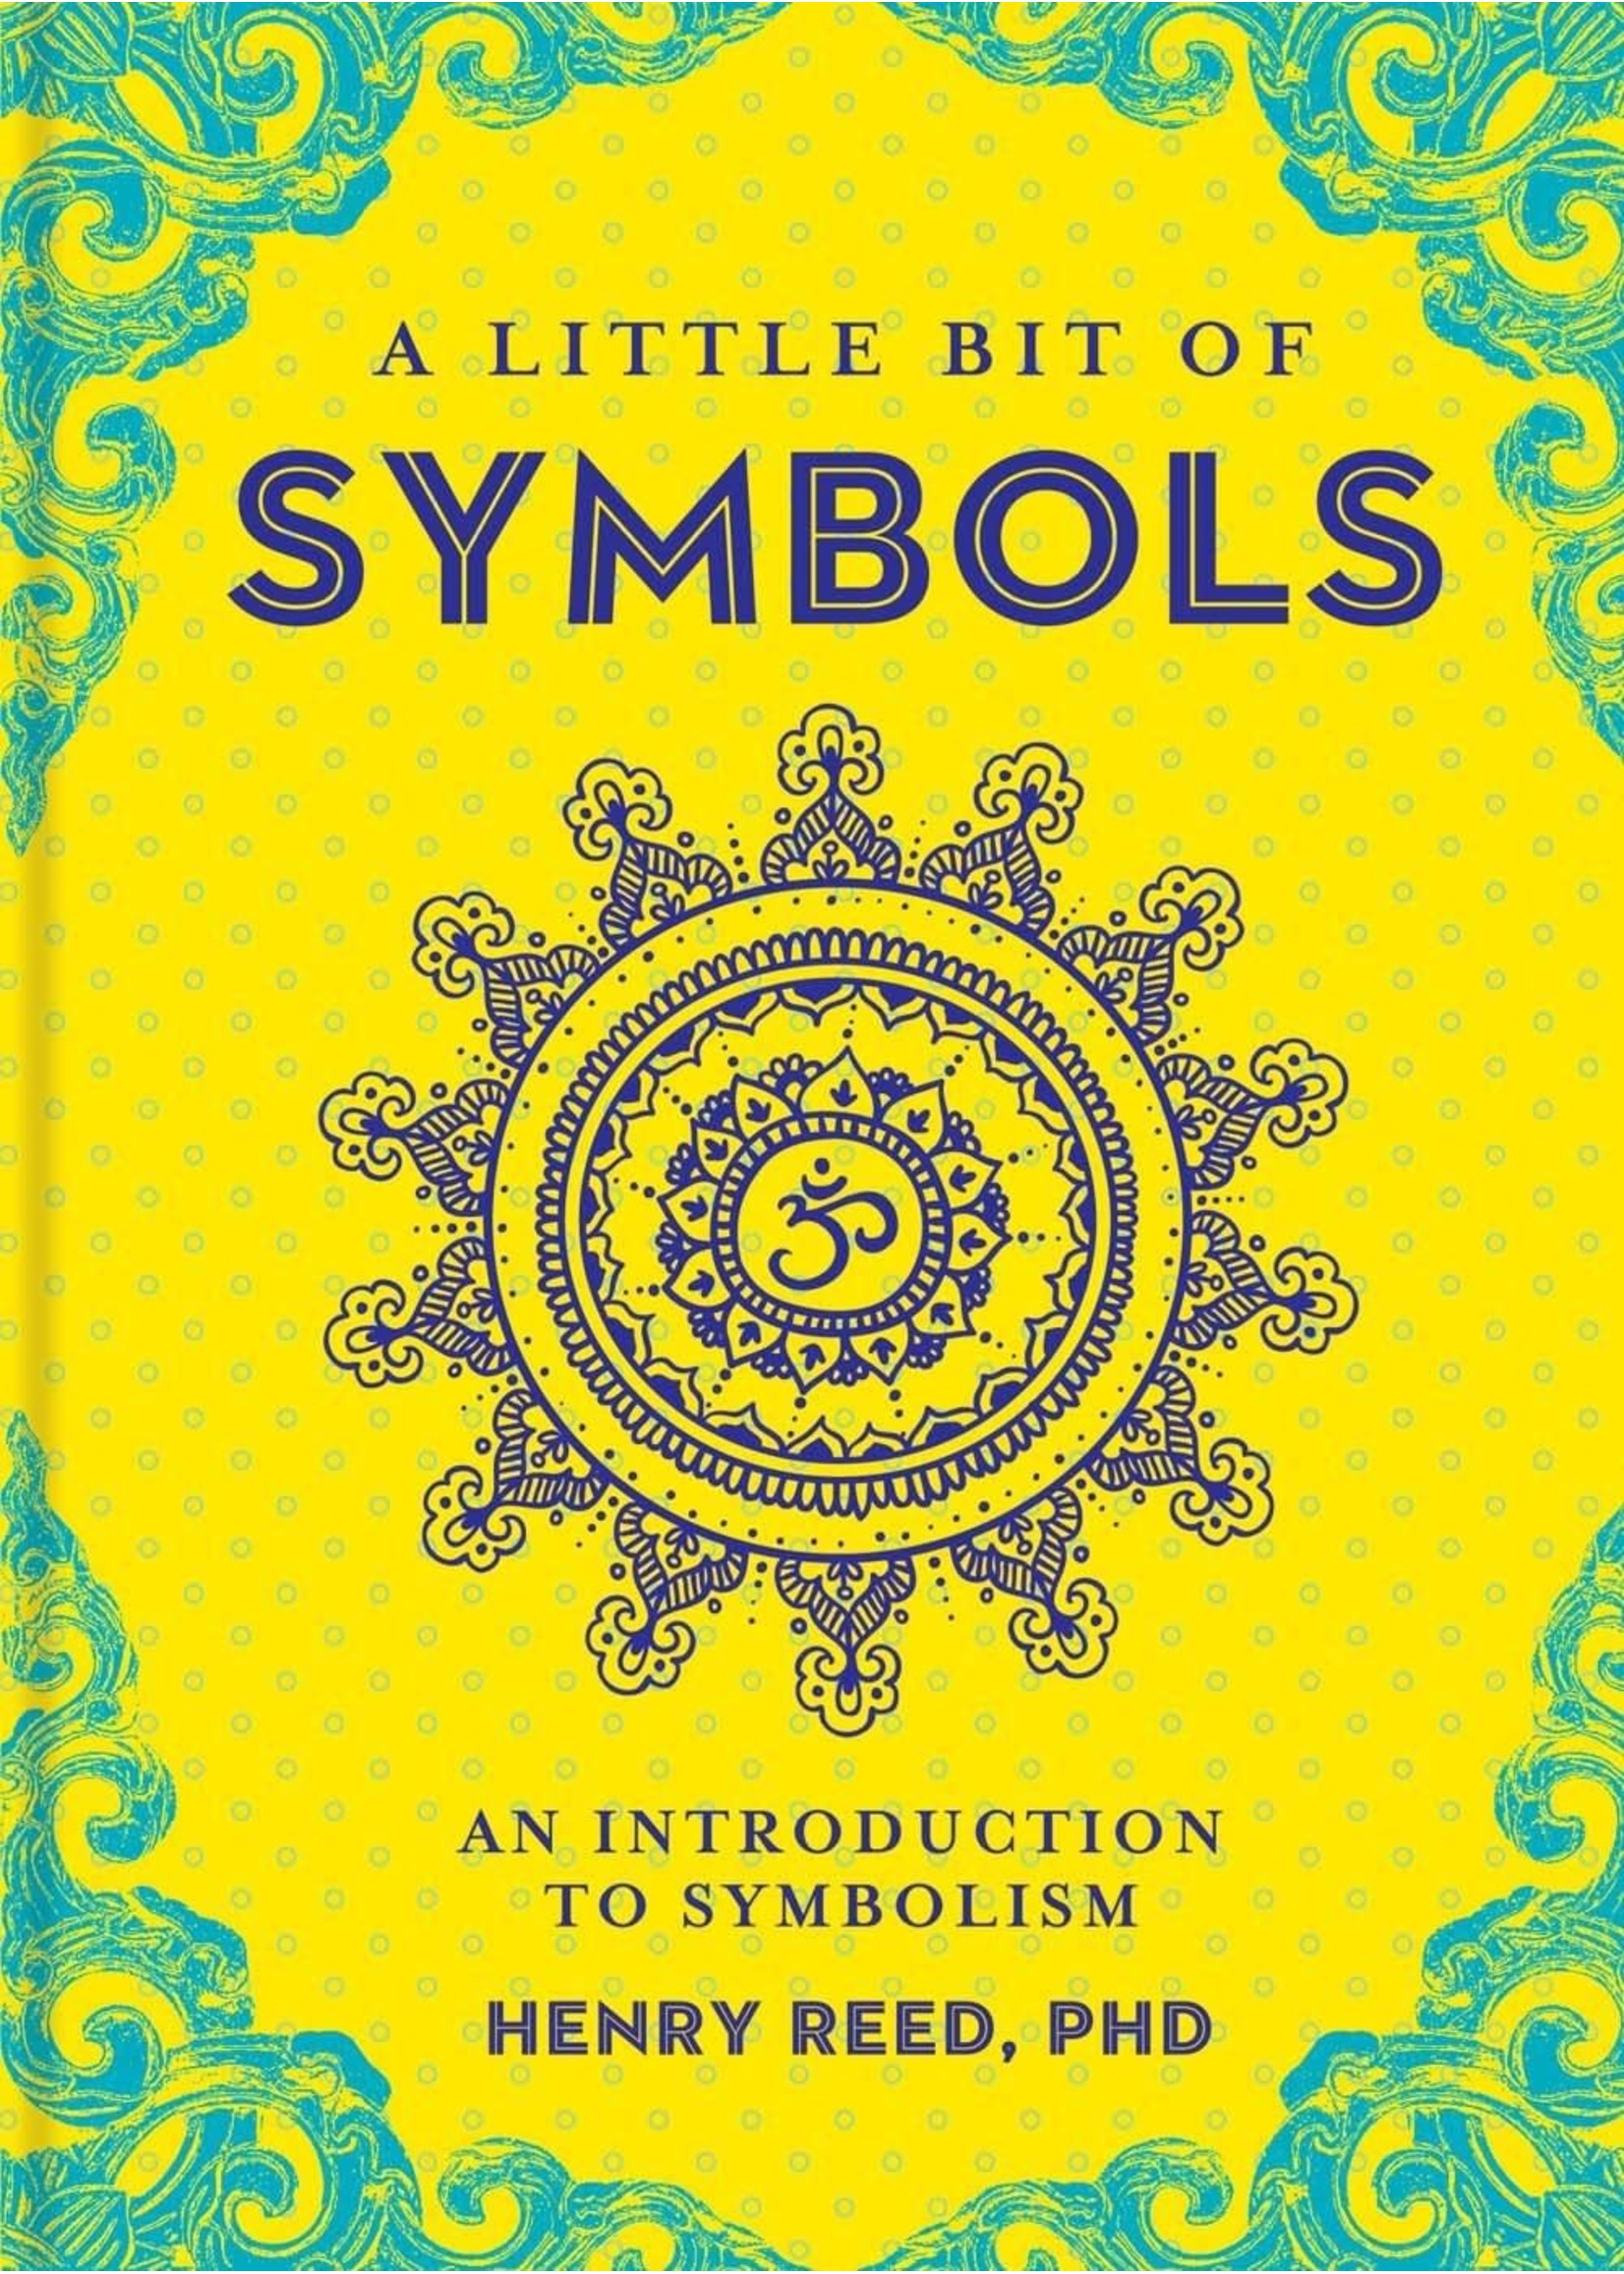 A Little Bit of Symbols- An Introduction to Symbolism